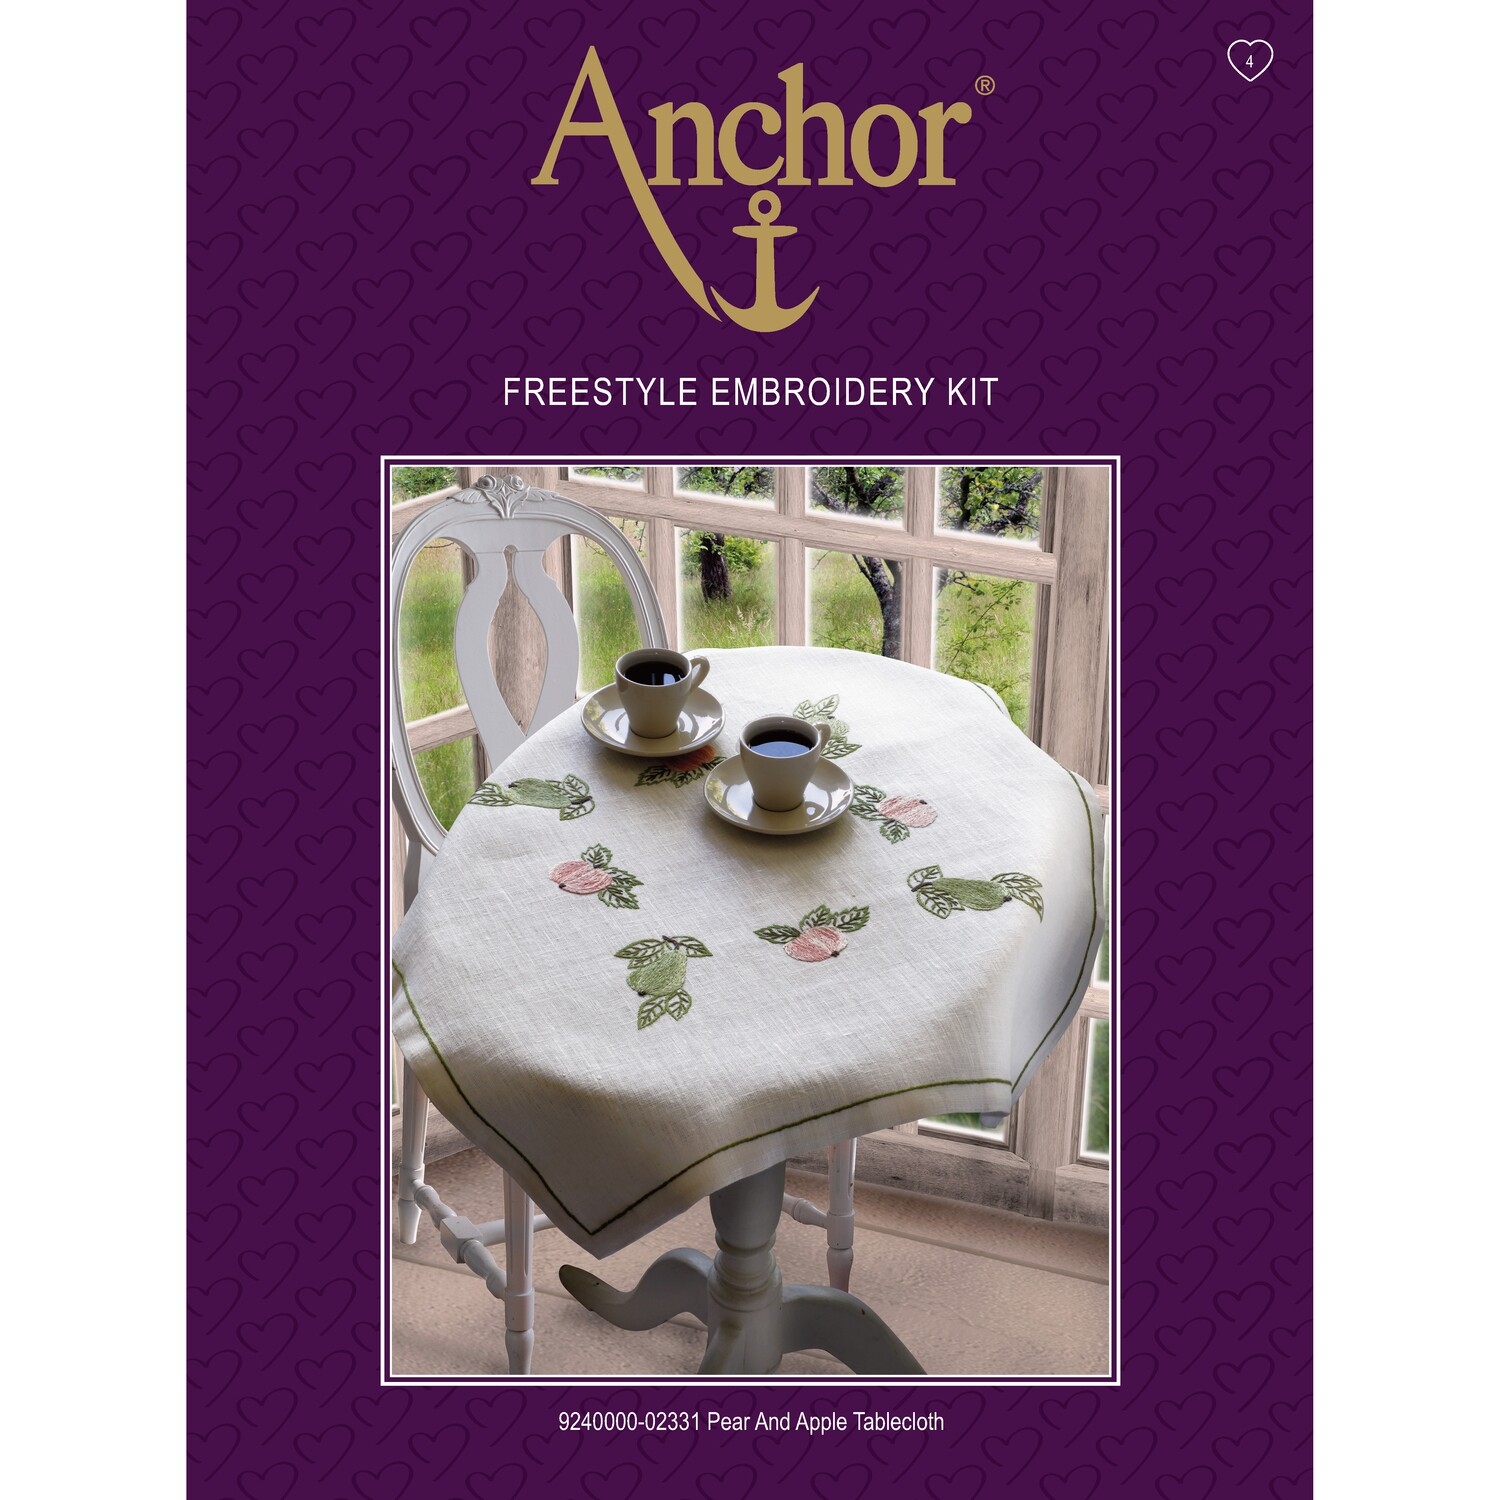 Anchor Essentials Freestyle Kit - Pear & Apple Tablecloth